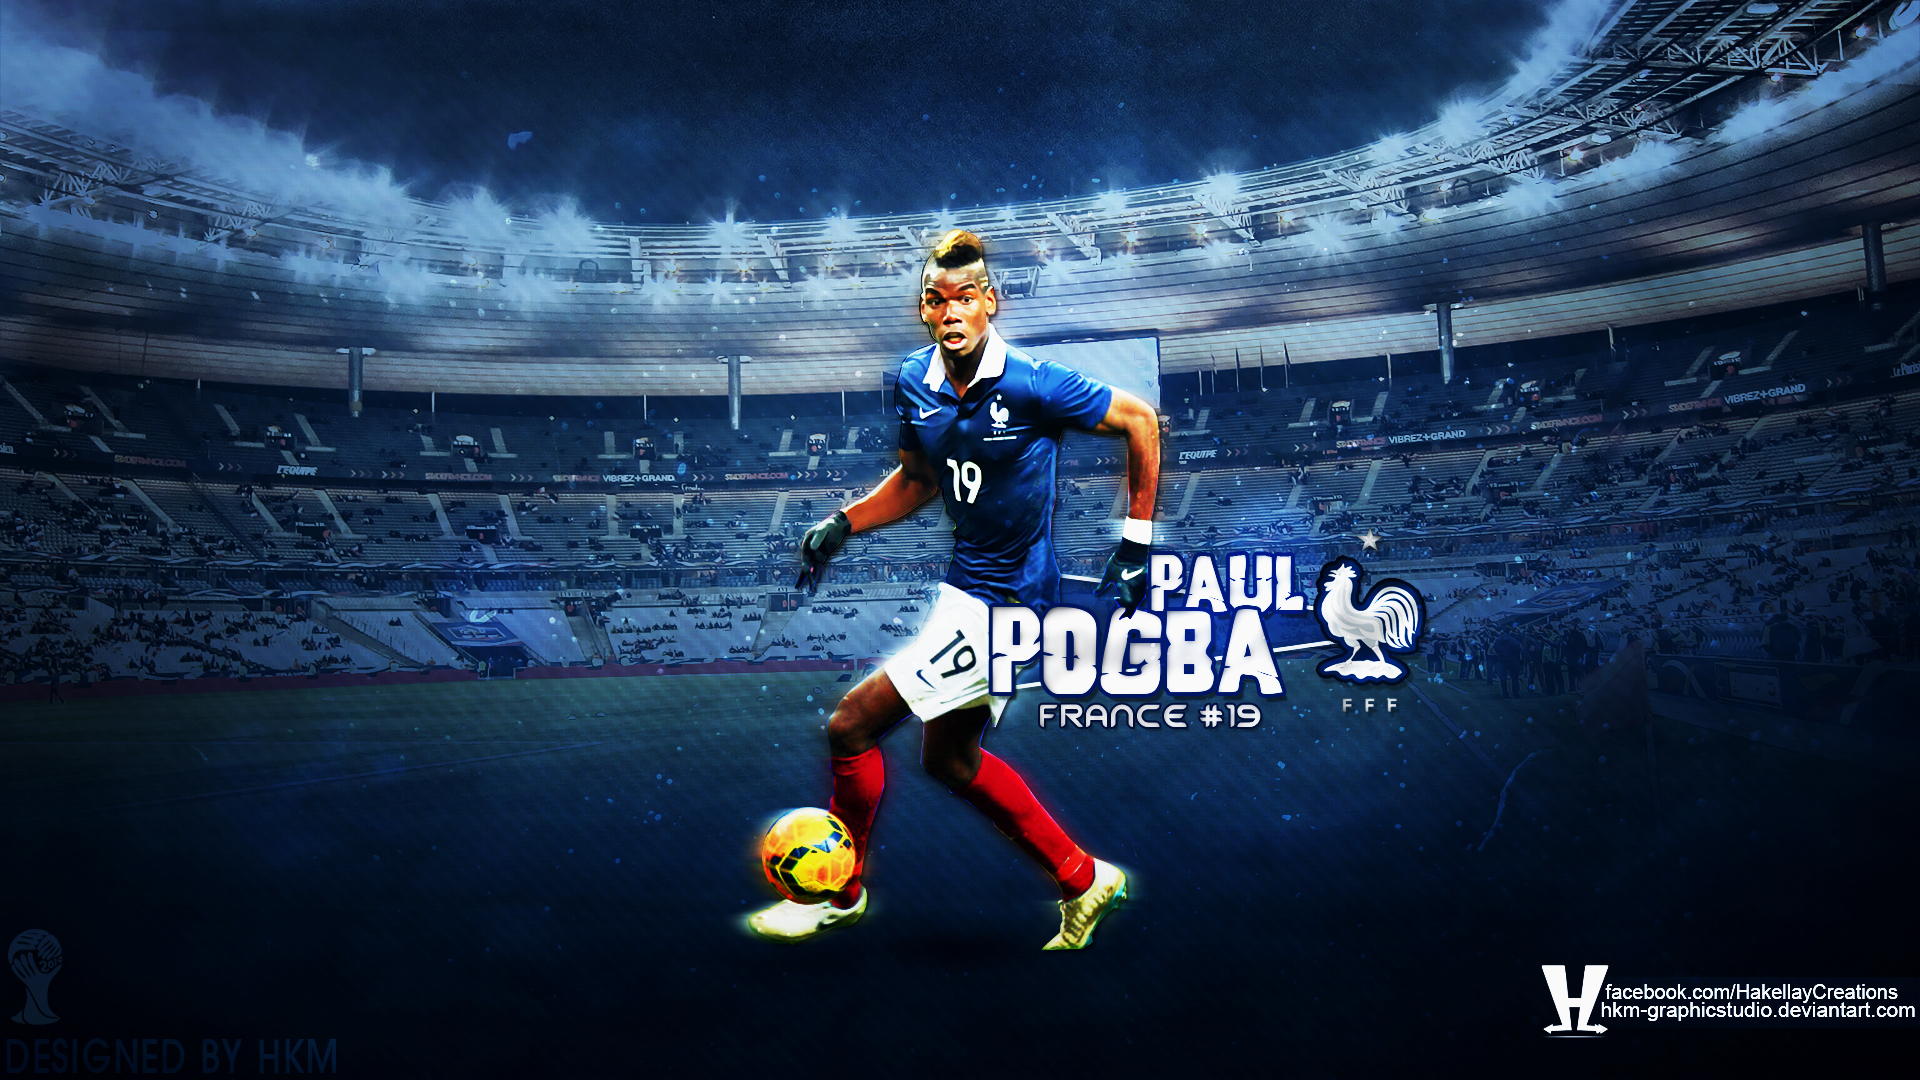 Paul Pogba Wallpaper High Resolution And Quality